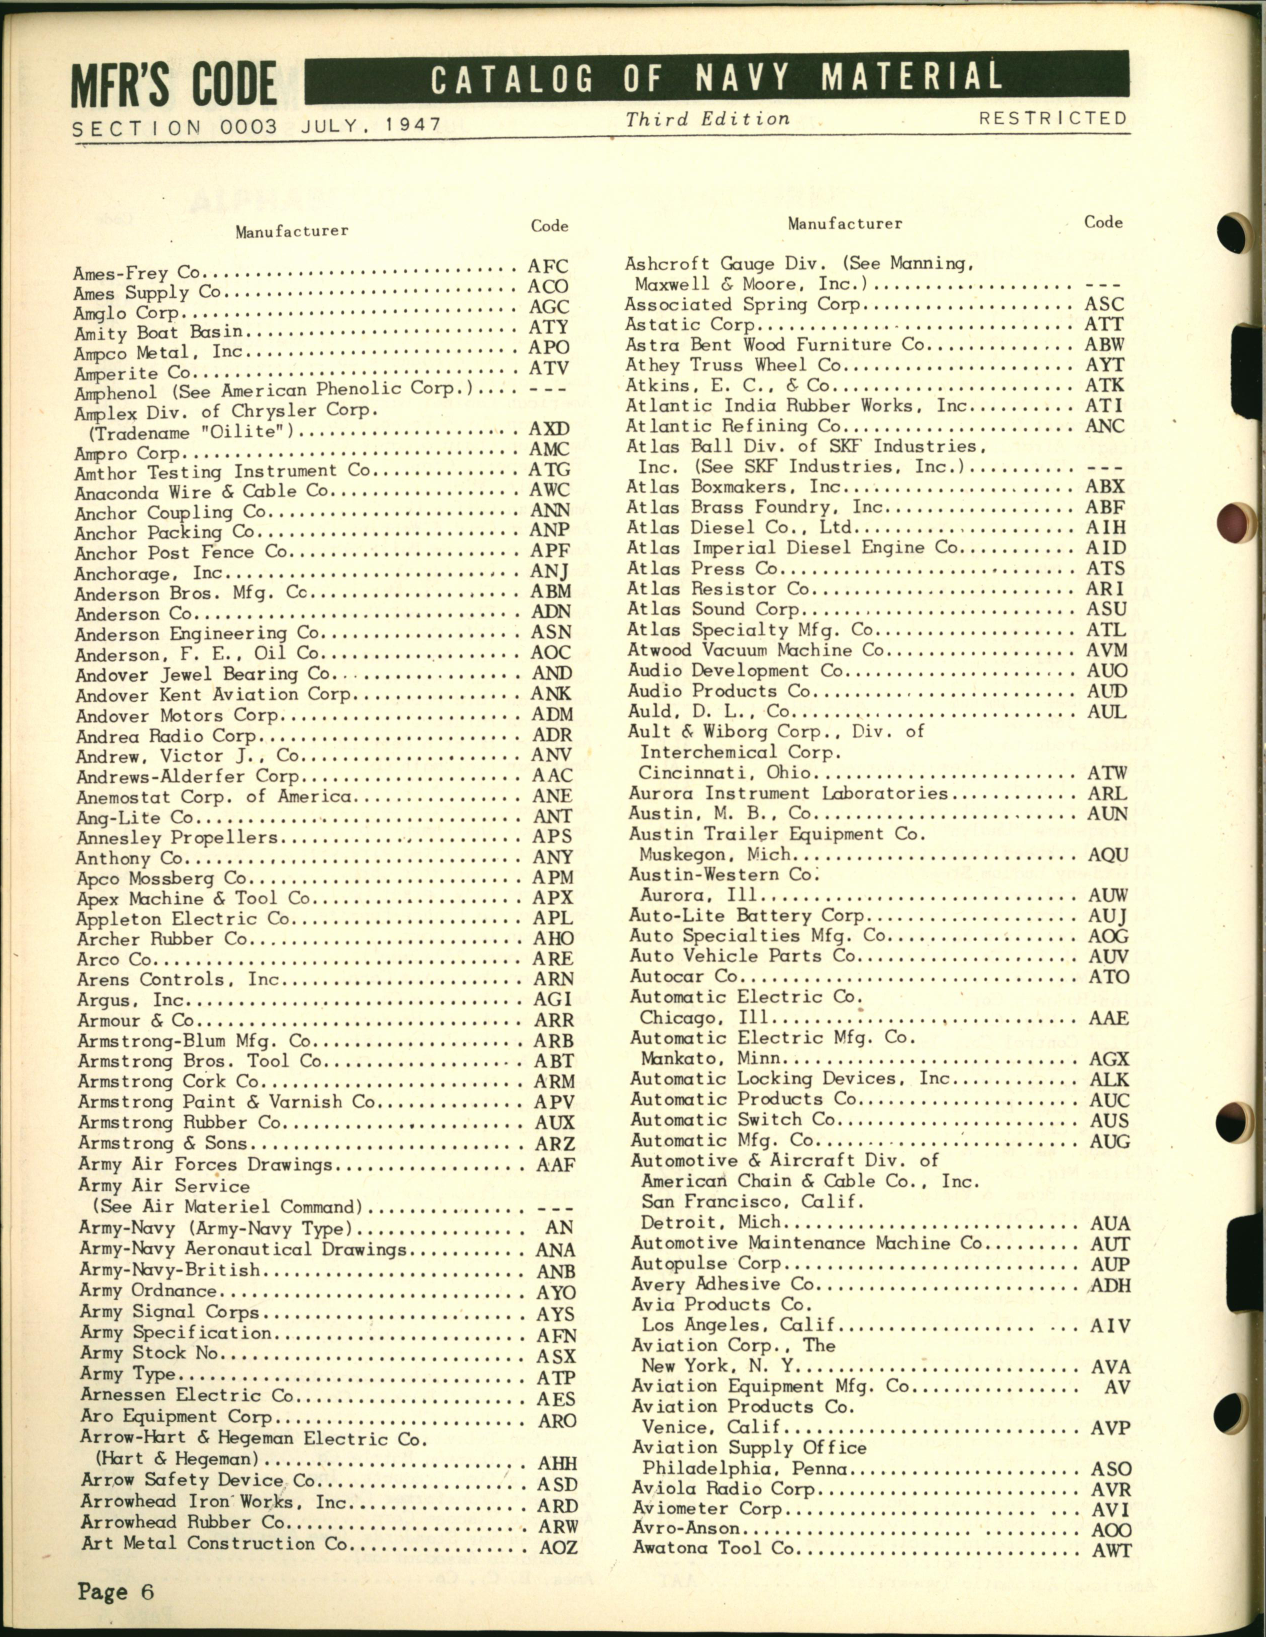 Sample page 6 from AirCorps Library document: Name of Code Index of Manufacturers of Aeronautical Material